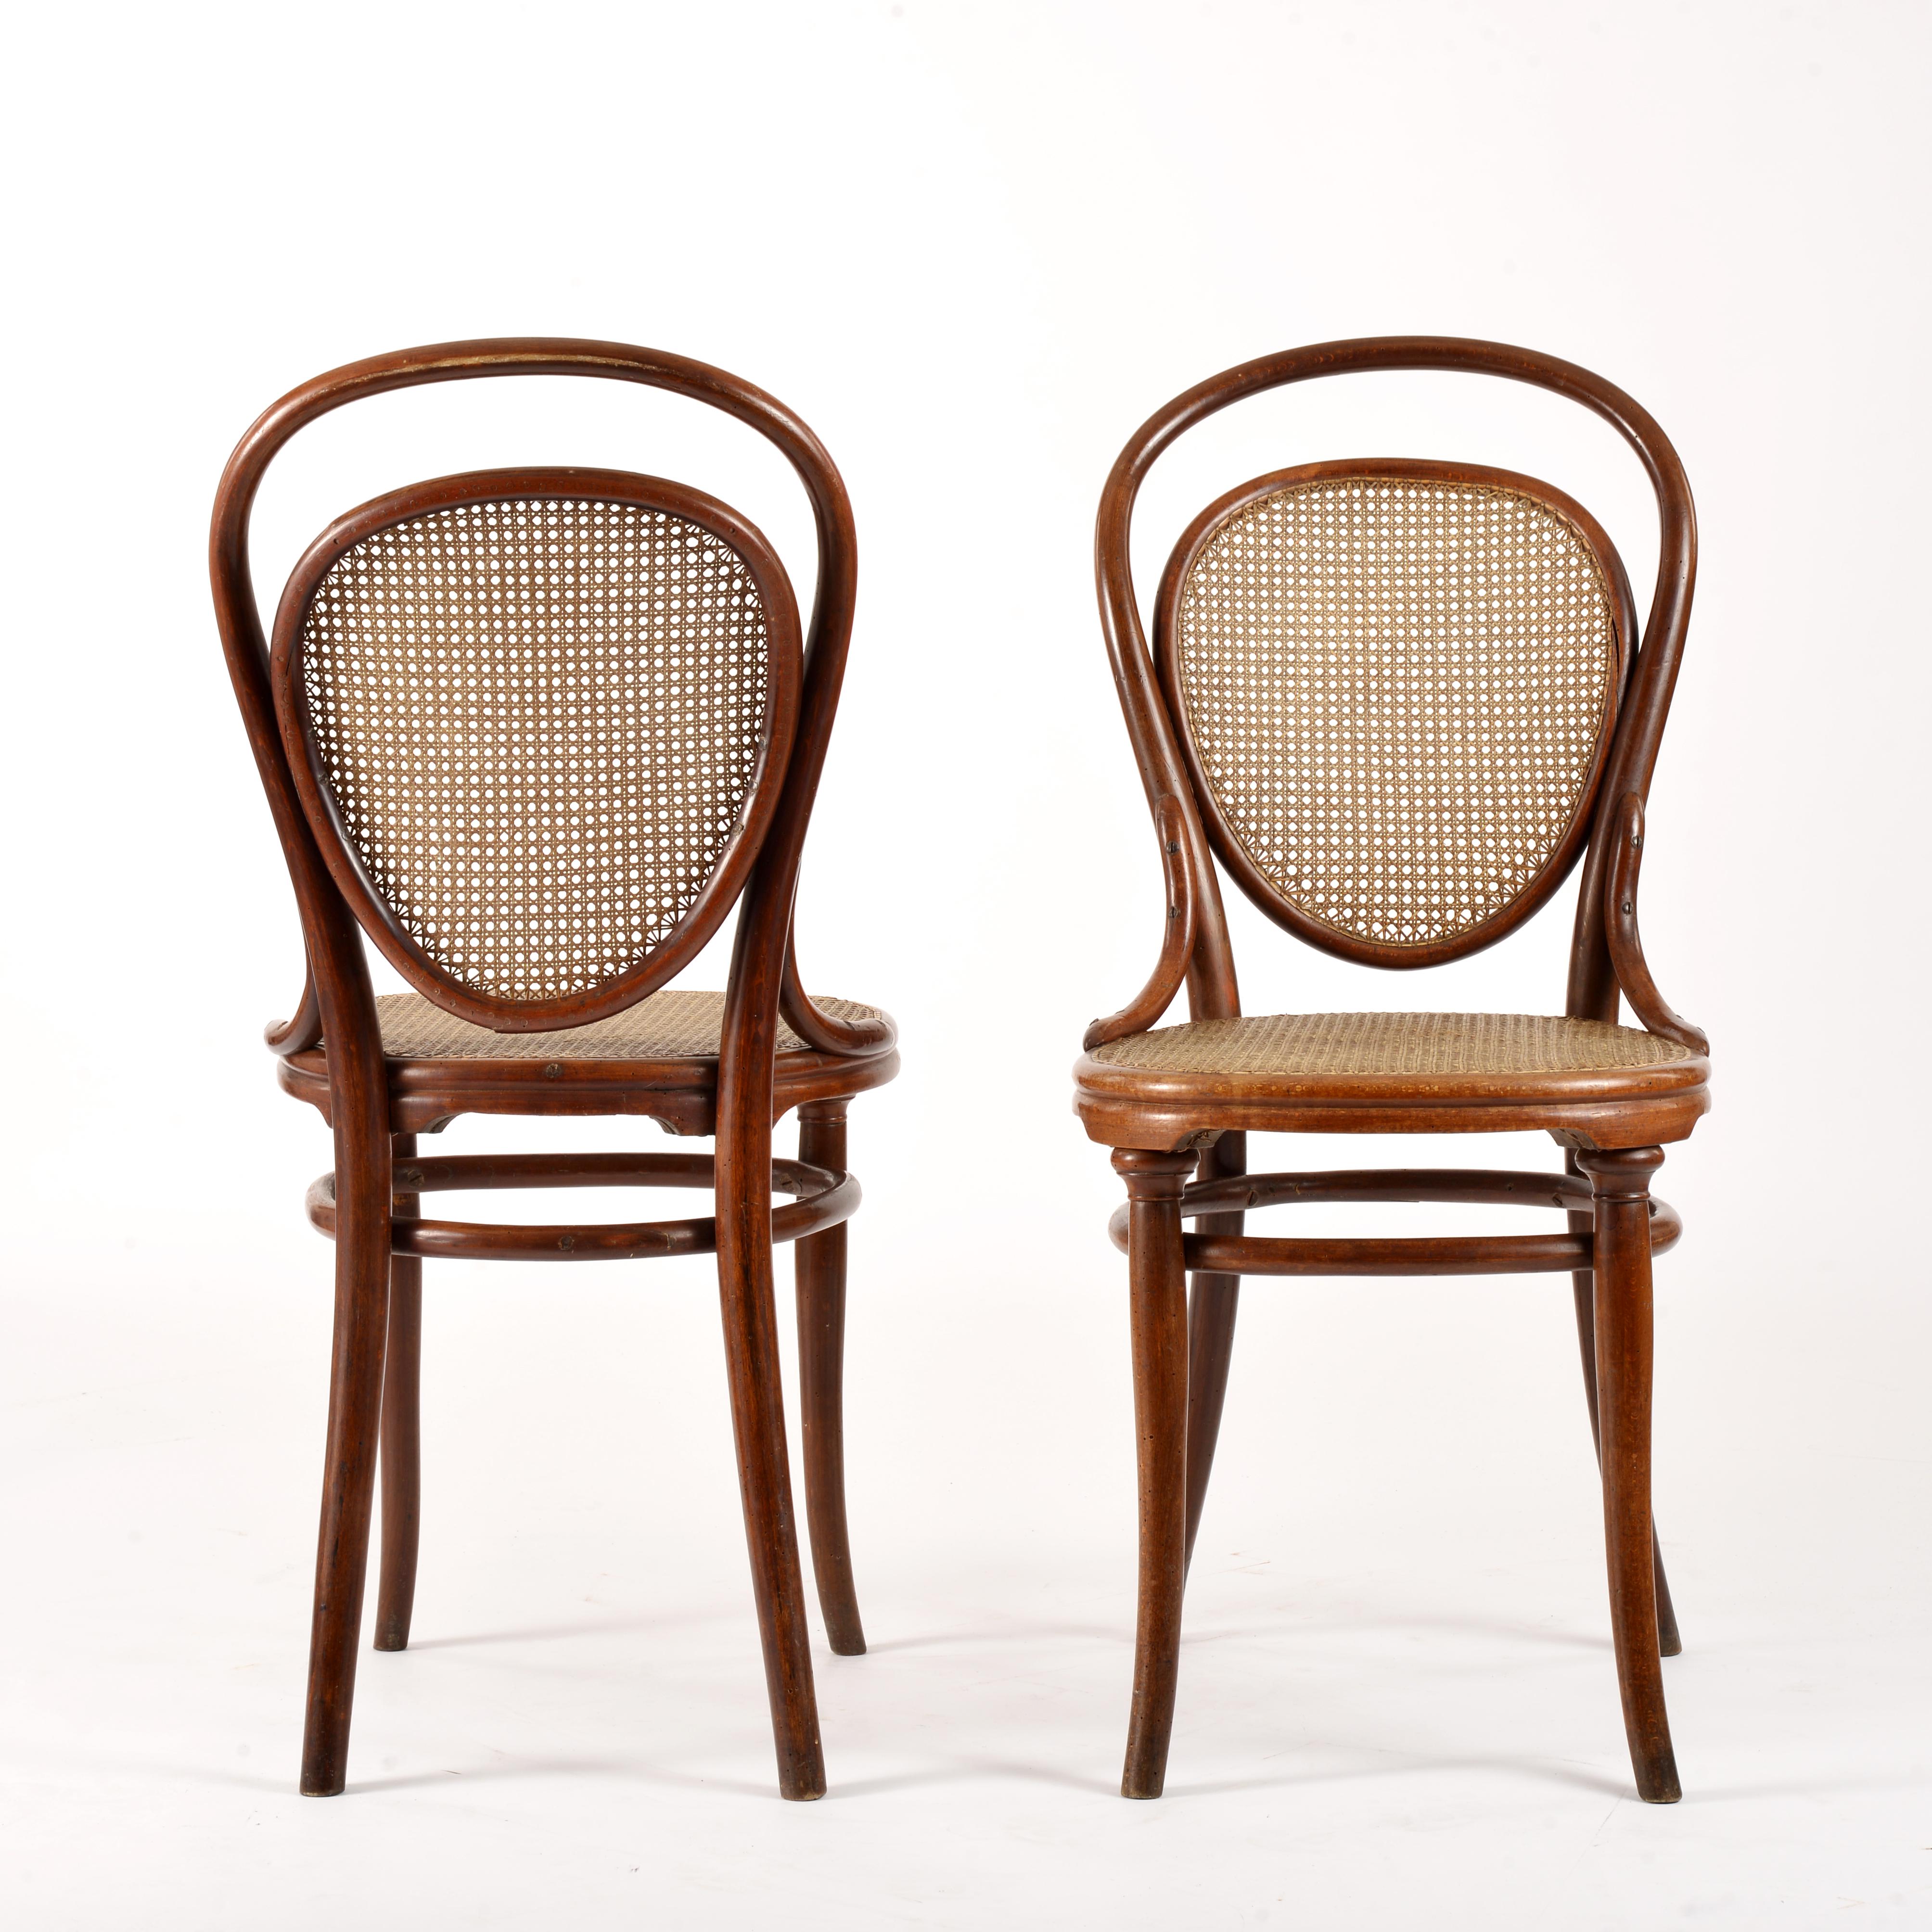 4 bentwood chairs, number 7, published by Thonet at the end of the 19th century. 1